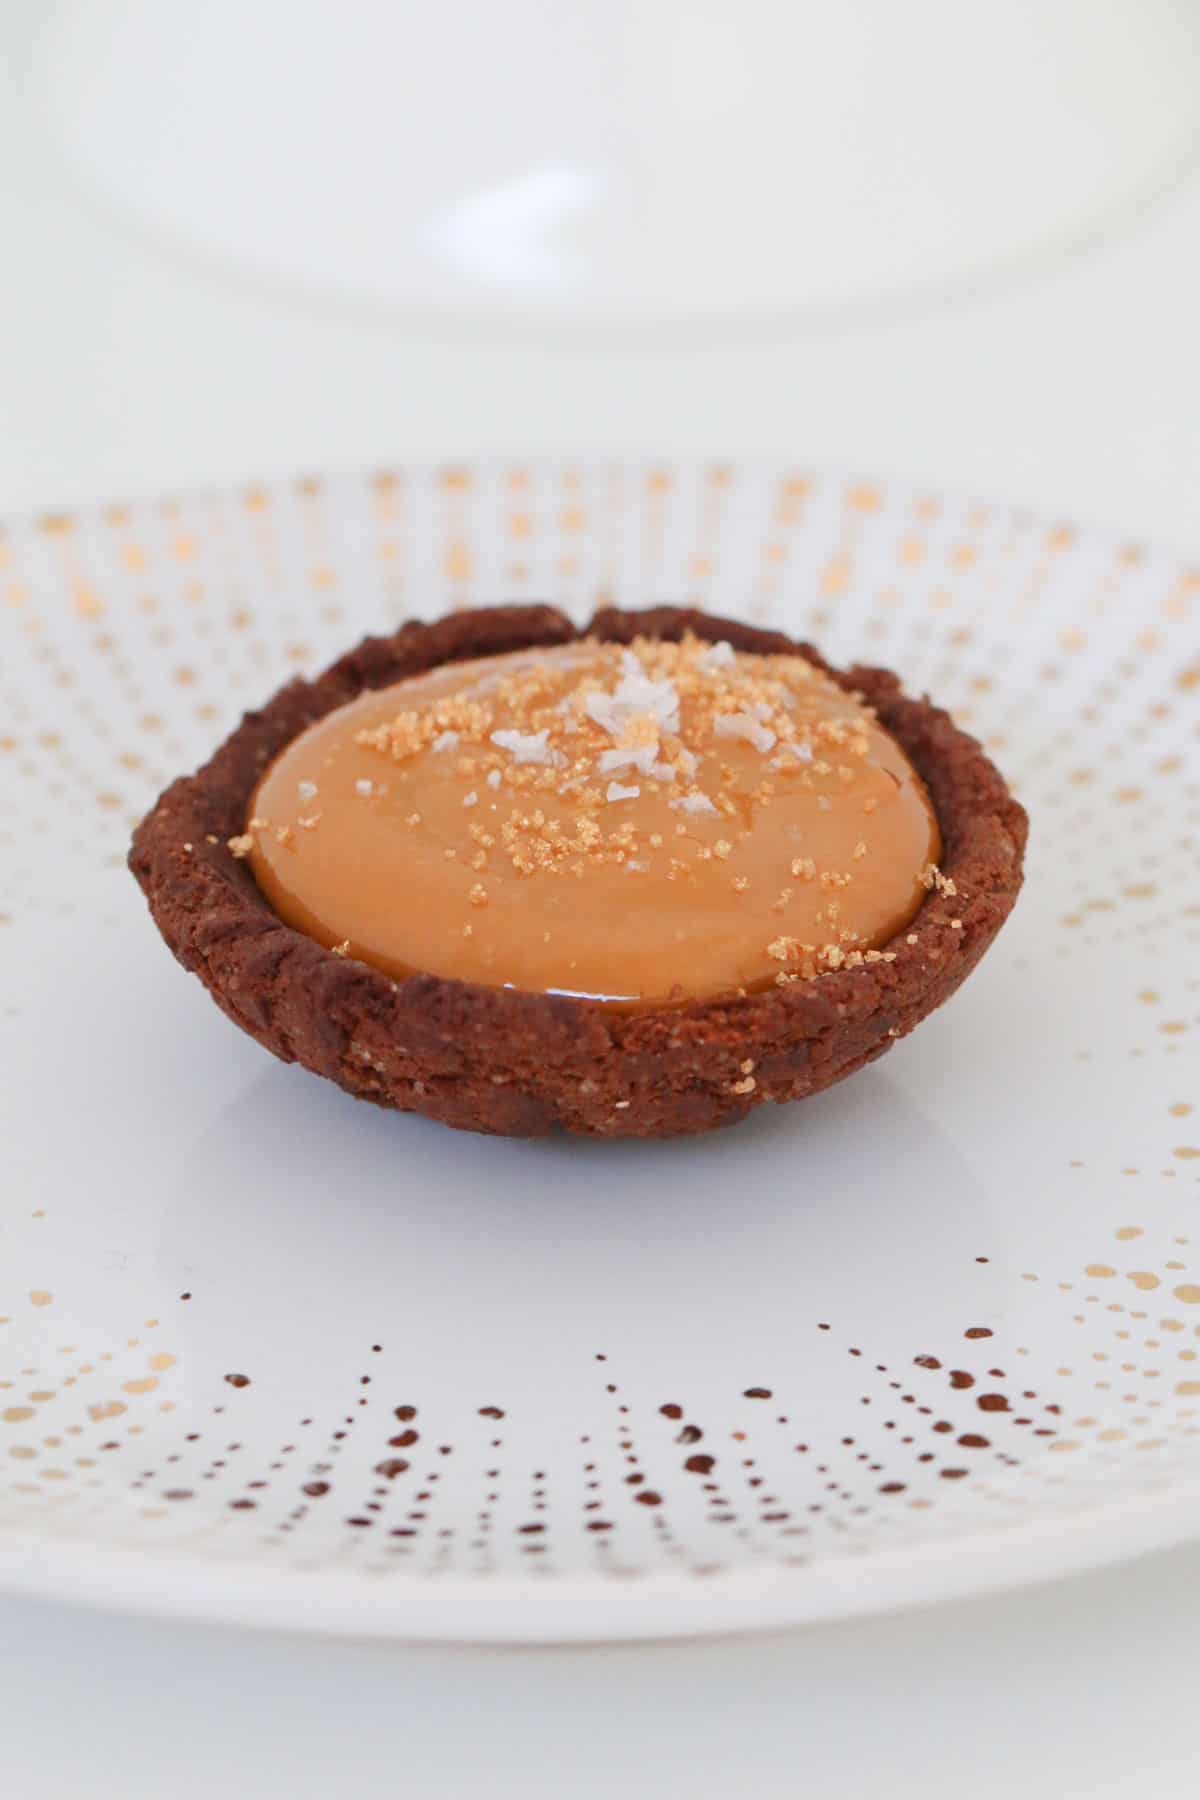 A round chocolate biscuit with caramel filling and sea salt on top.